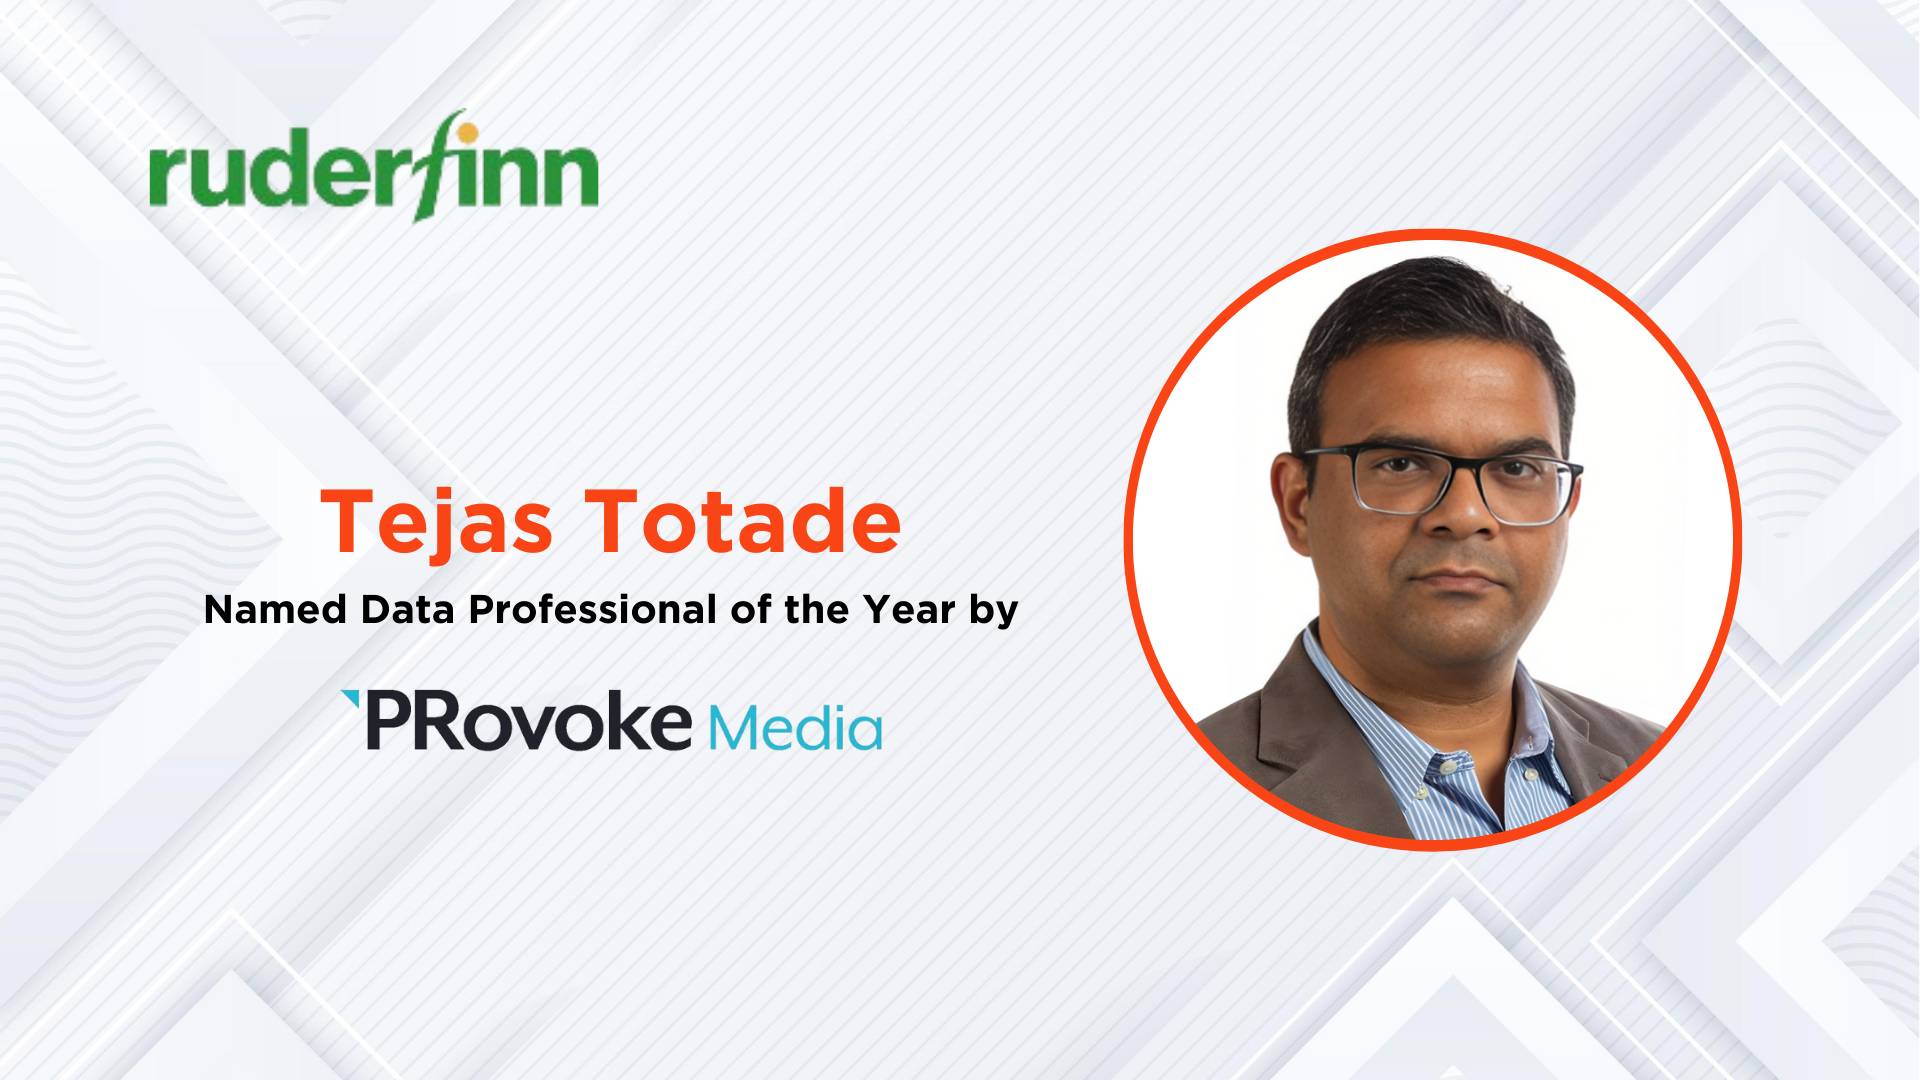 Ruder Finn's Tejas Totade Named Data Professional of the Year by PRovoke Media